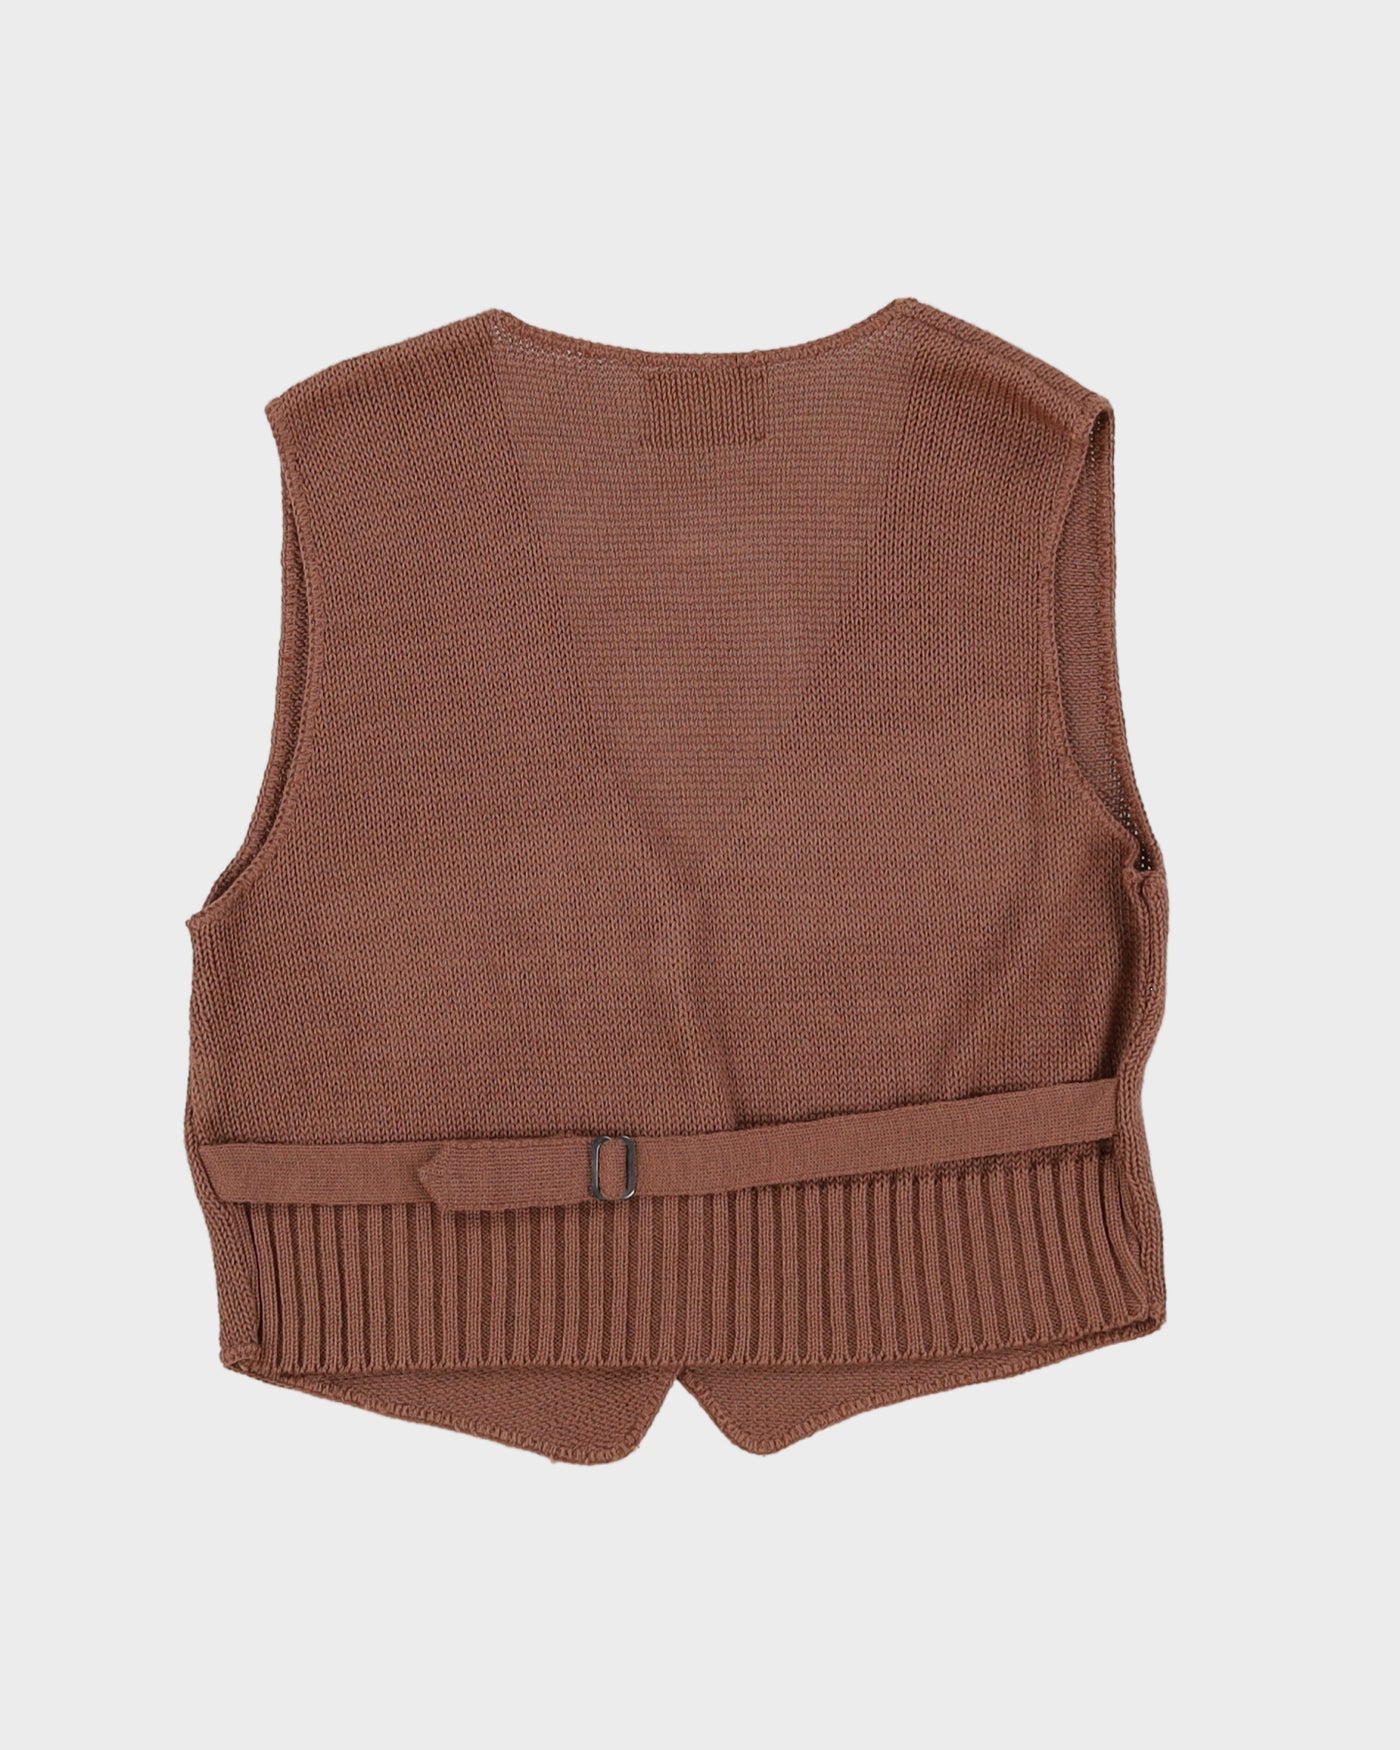 1970s Brown Tie-Back Knitted Waistcoat - S